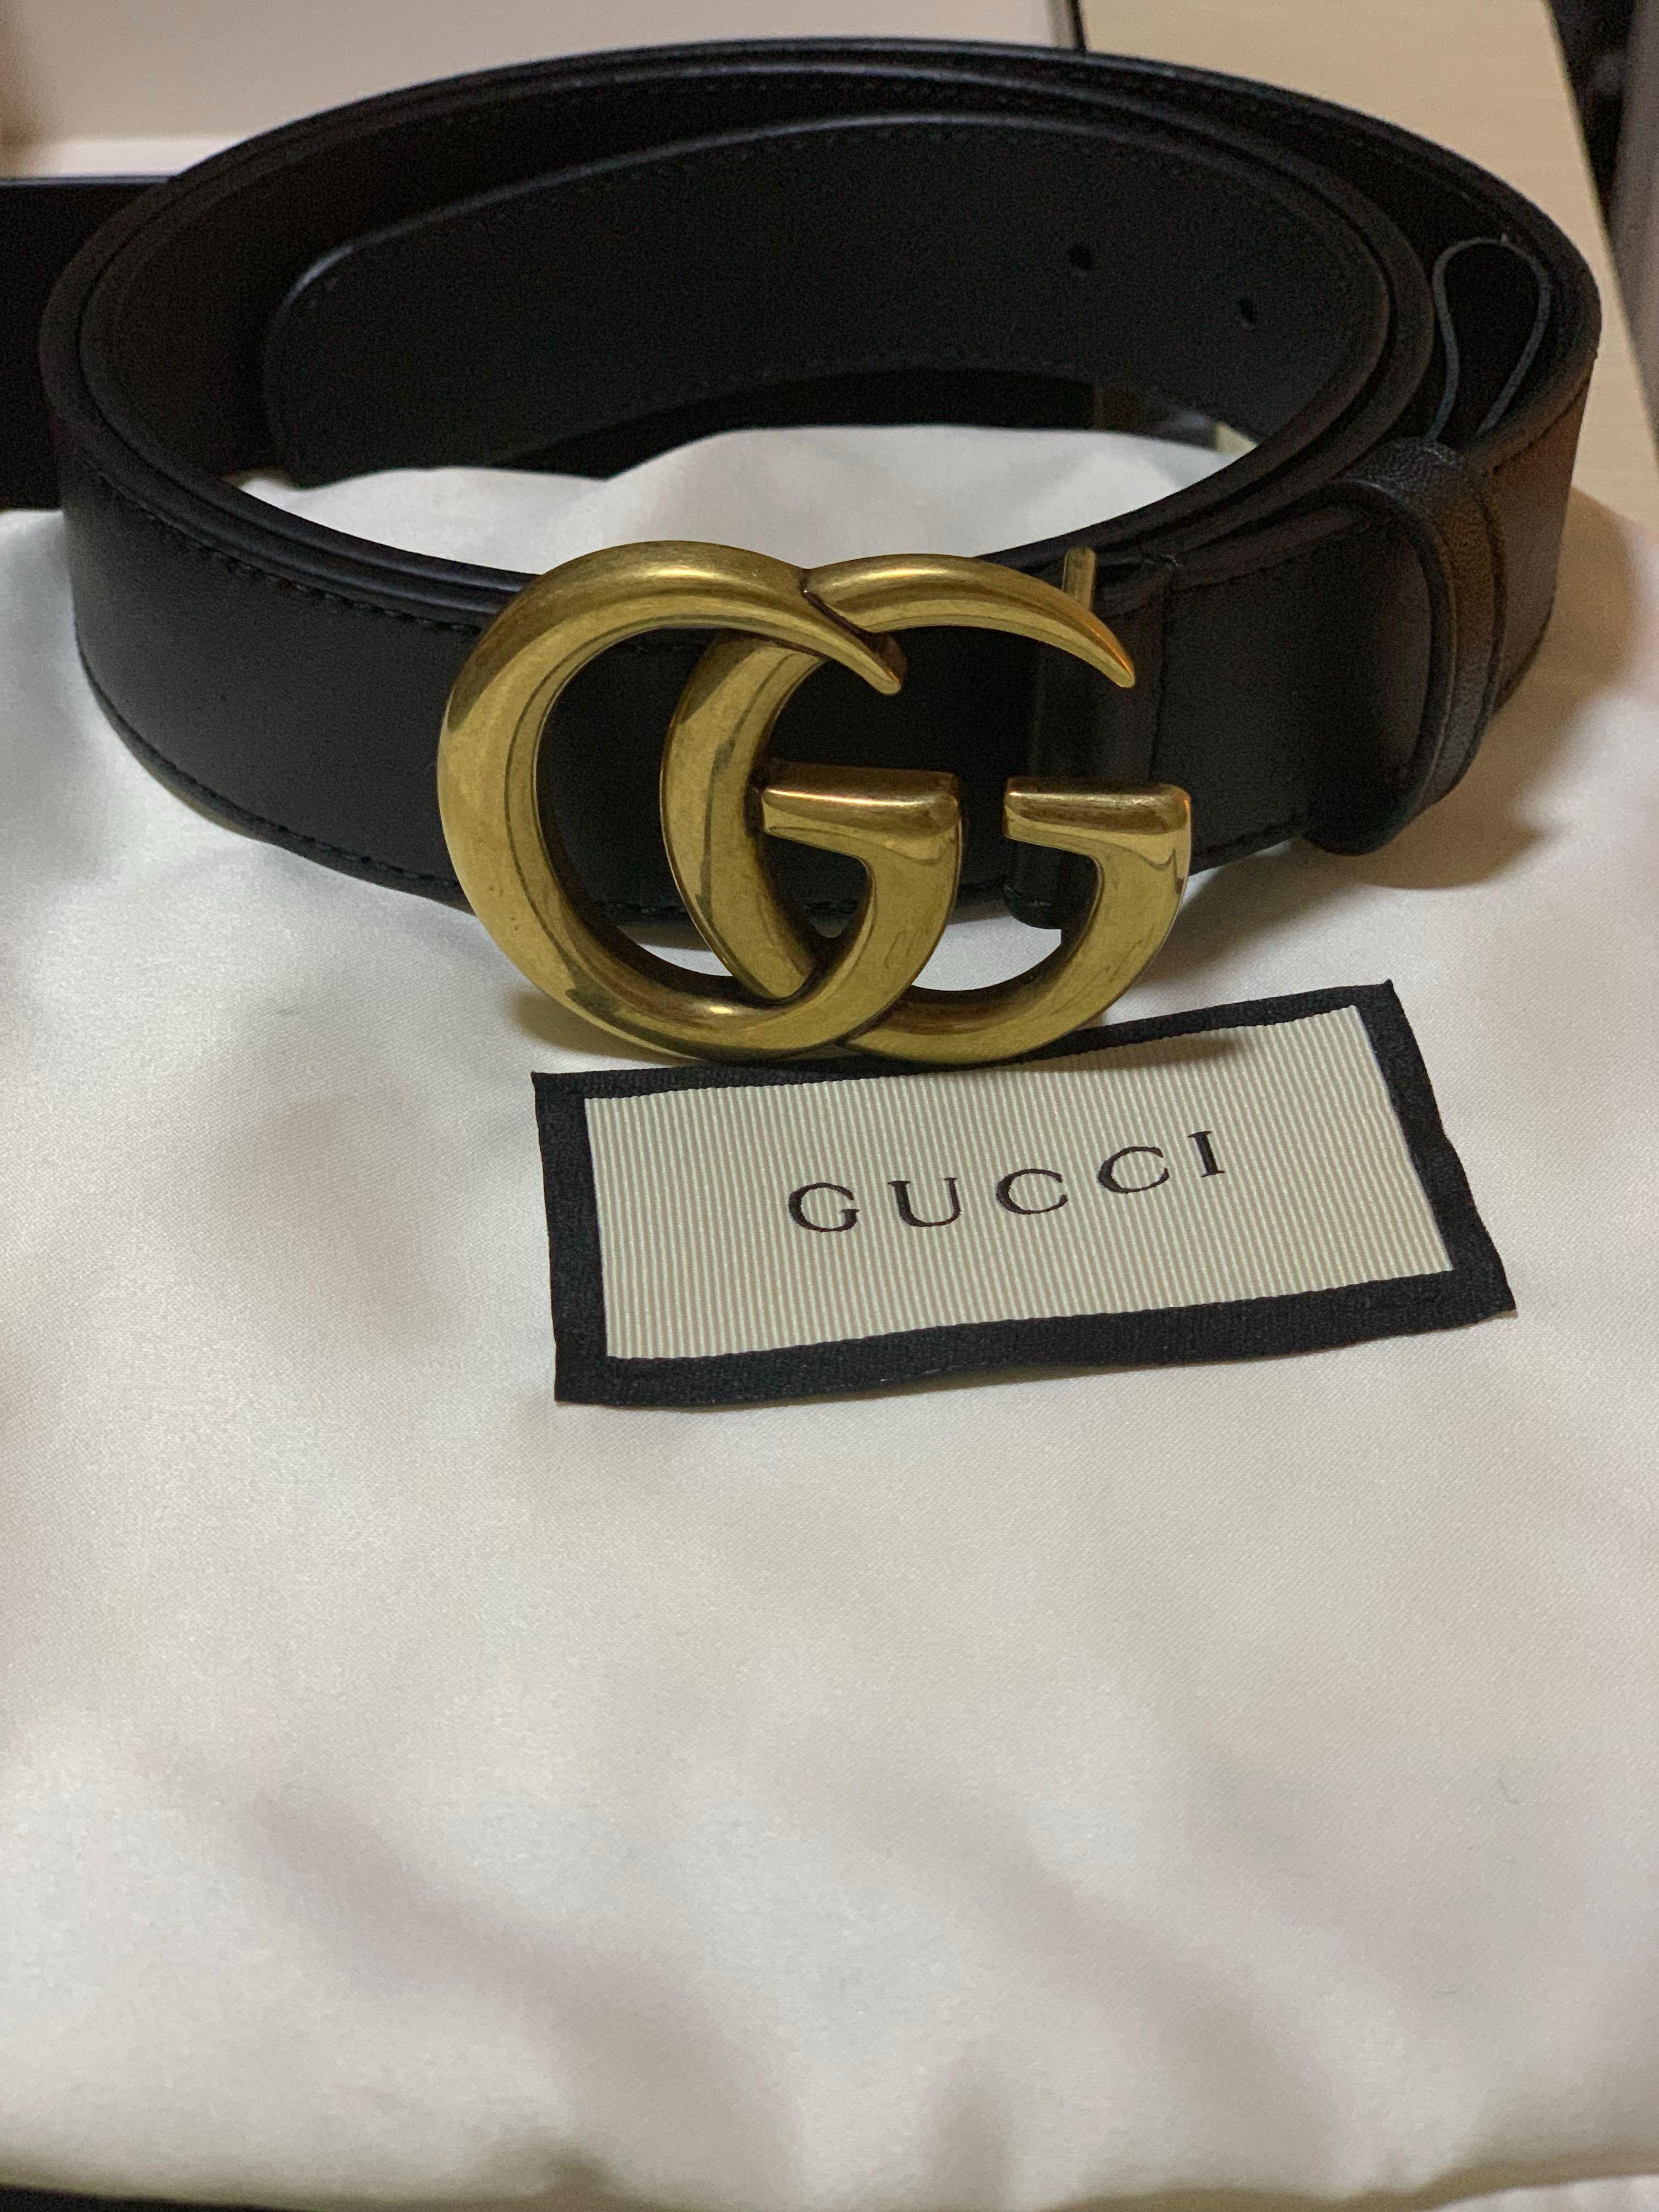 price for a gucci belt